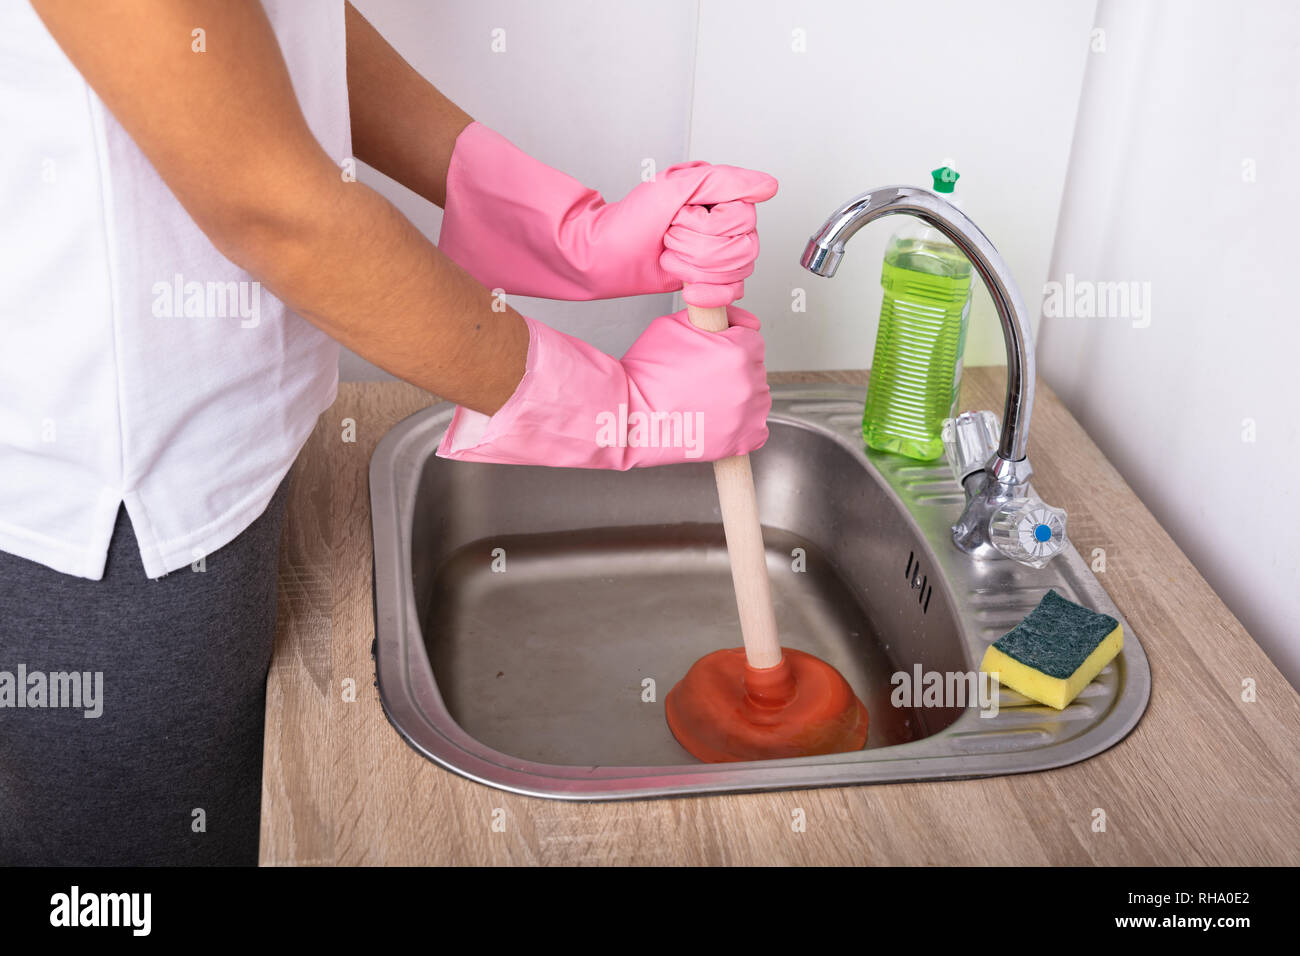 Close-up Of A Female Plumber Wearing Pink Gloves Using Plunger In The Kitchen Sink Stock Photo